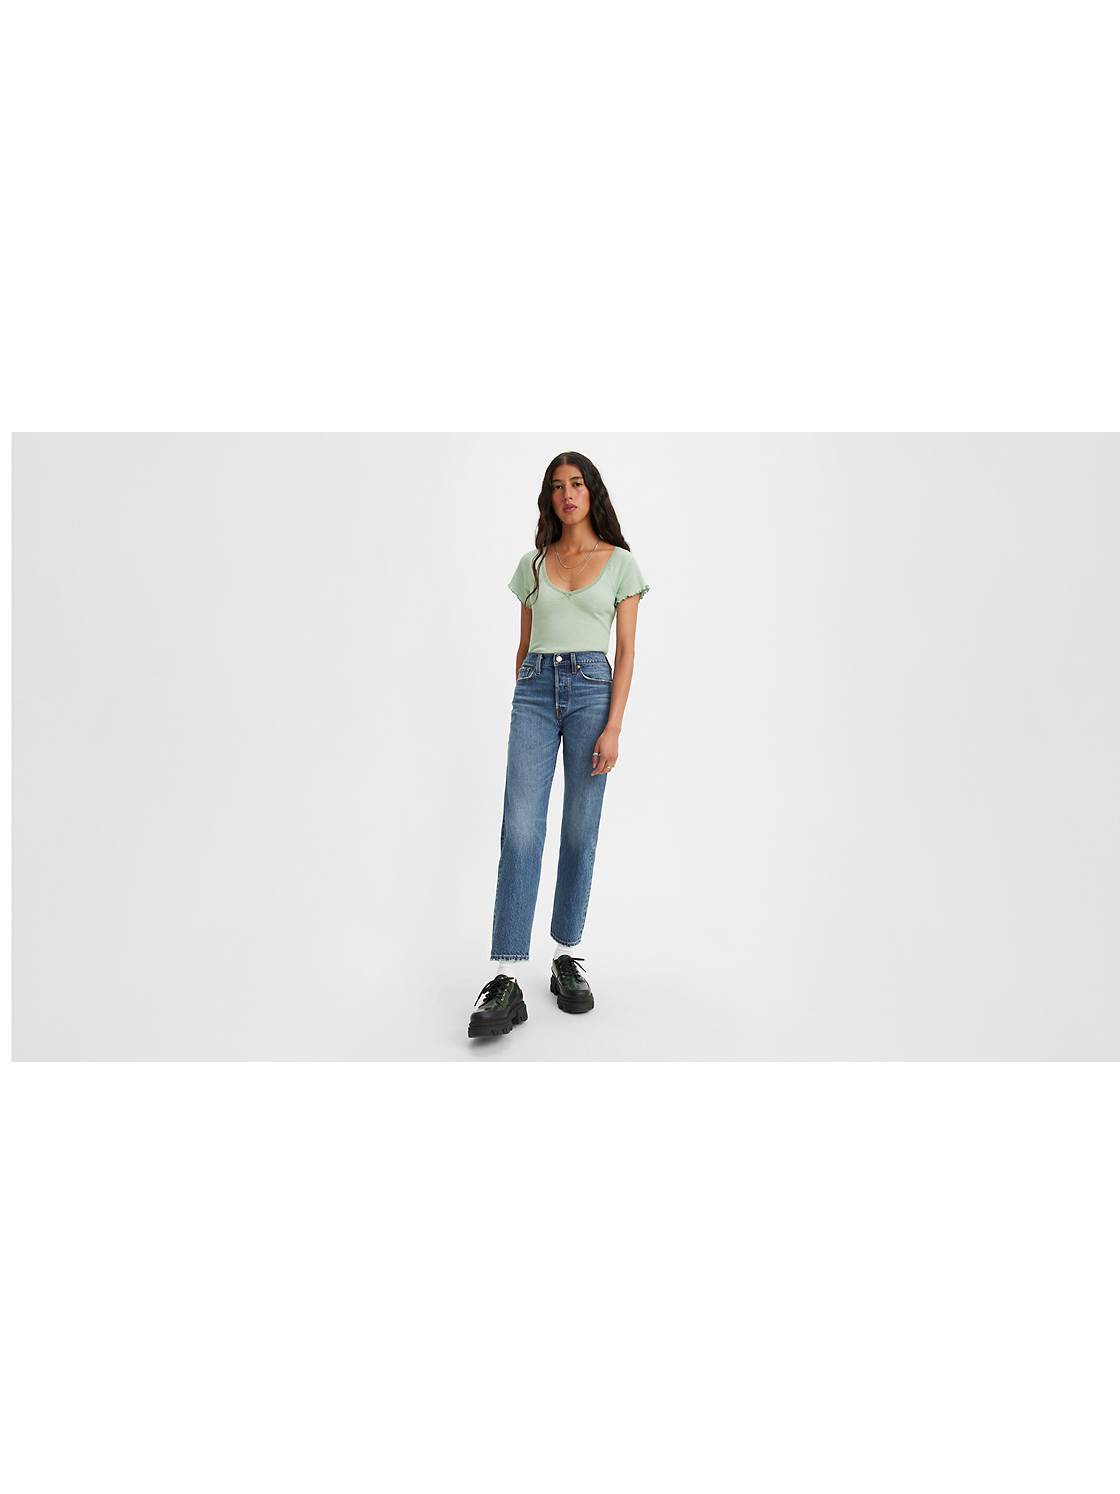 Shop Black Jeggings Pants Women with great discounts and prices